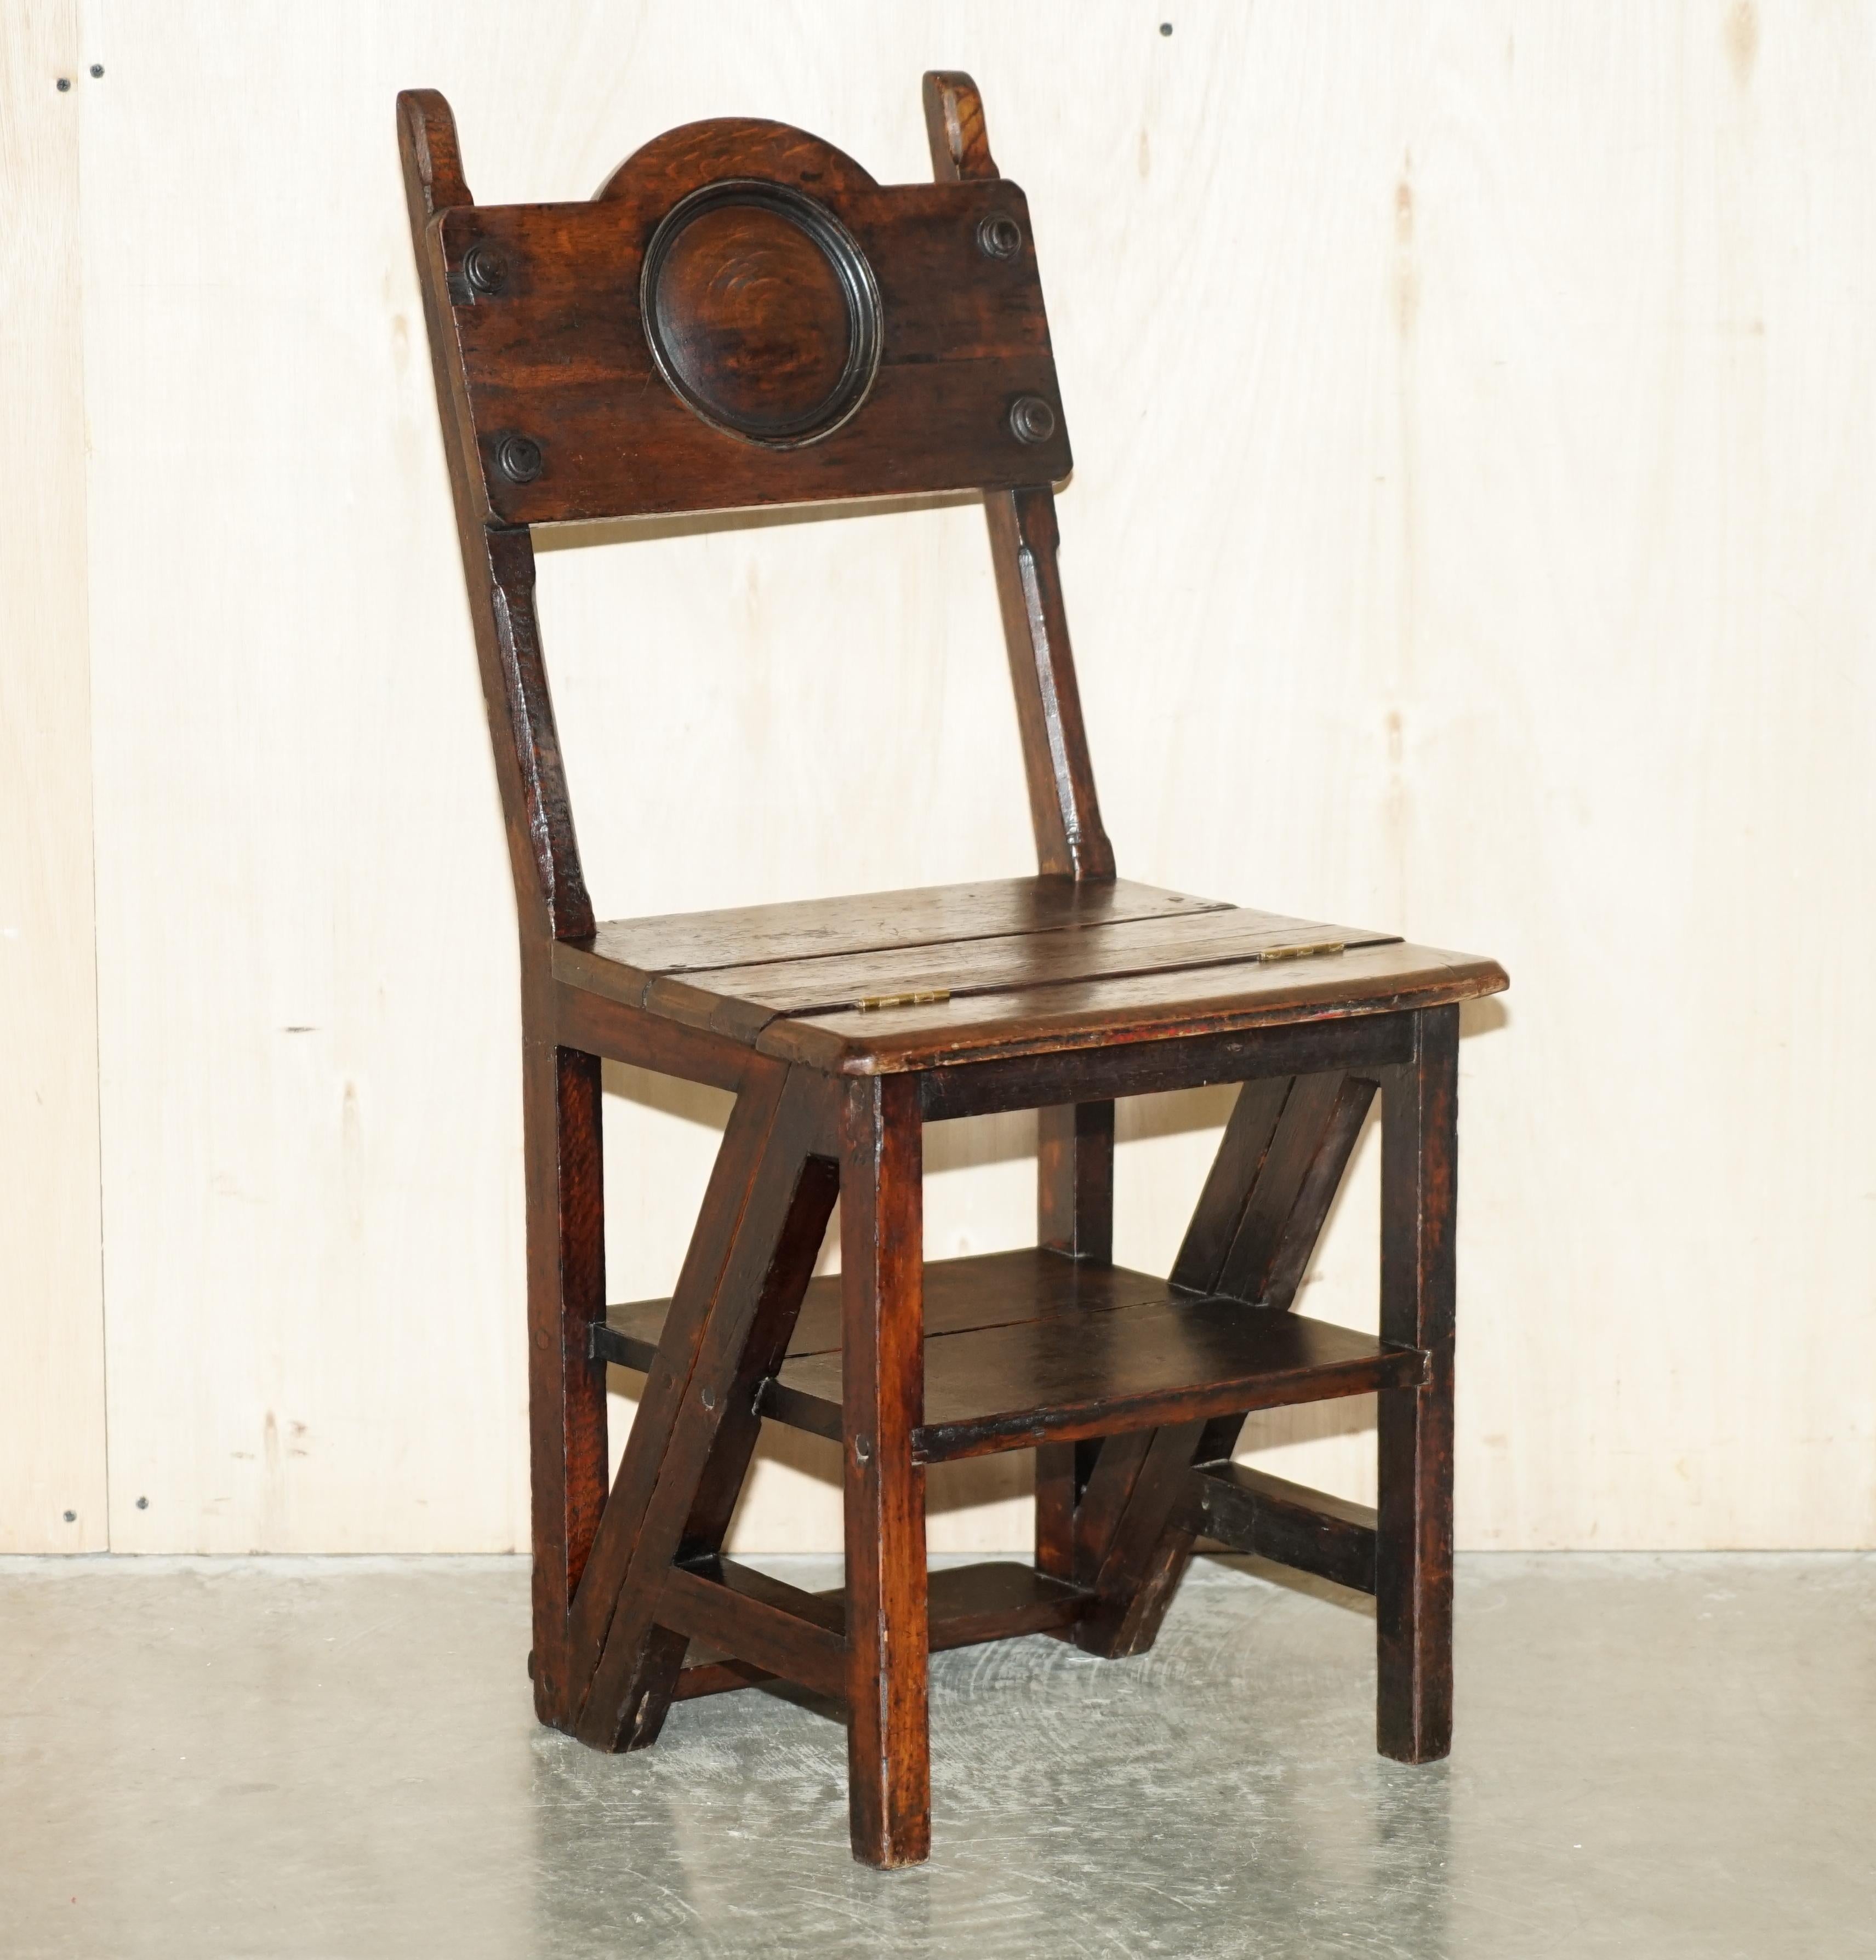 We are is delighted to offer for sale this lovely antique Mid Victorian metamorphic library steps chair in oak with period carvings to the back

A very charming and highly collectable piece, designed as an at home library steps and reading chair,